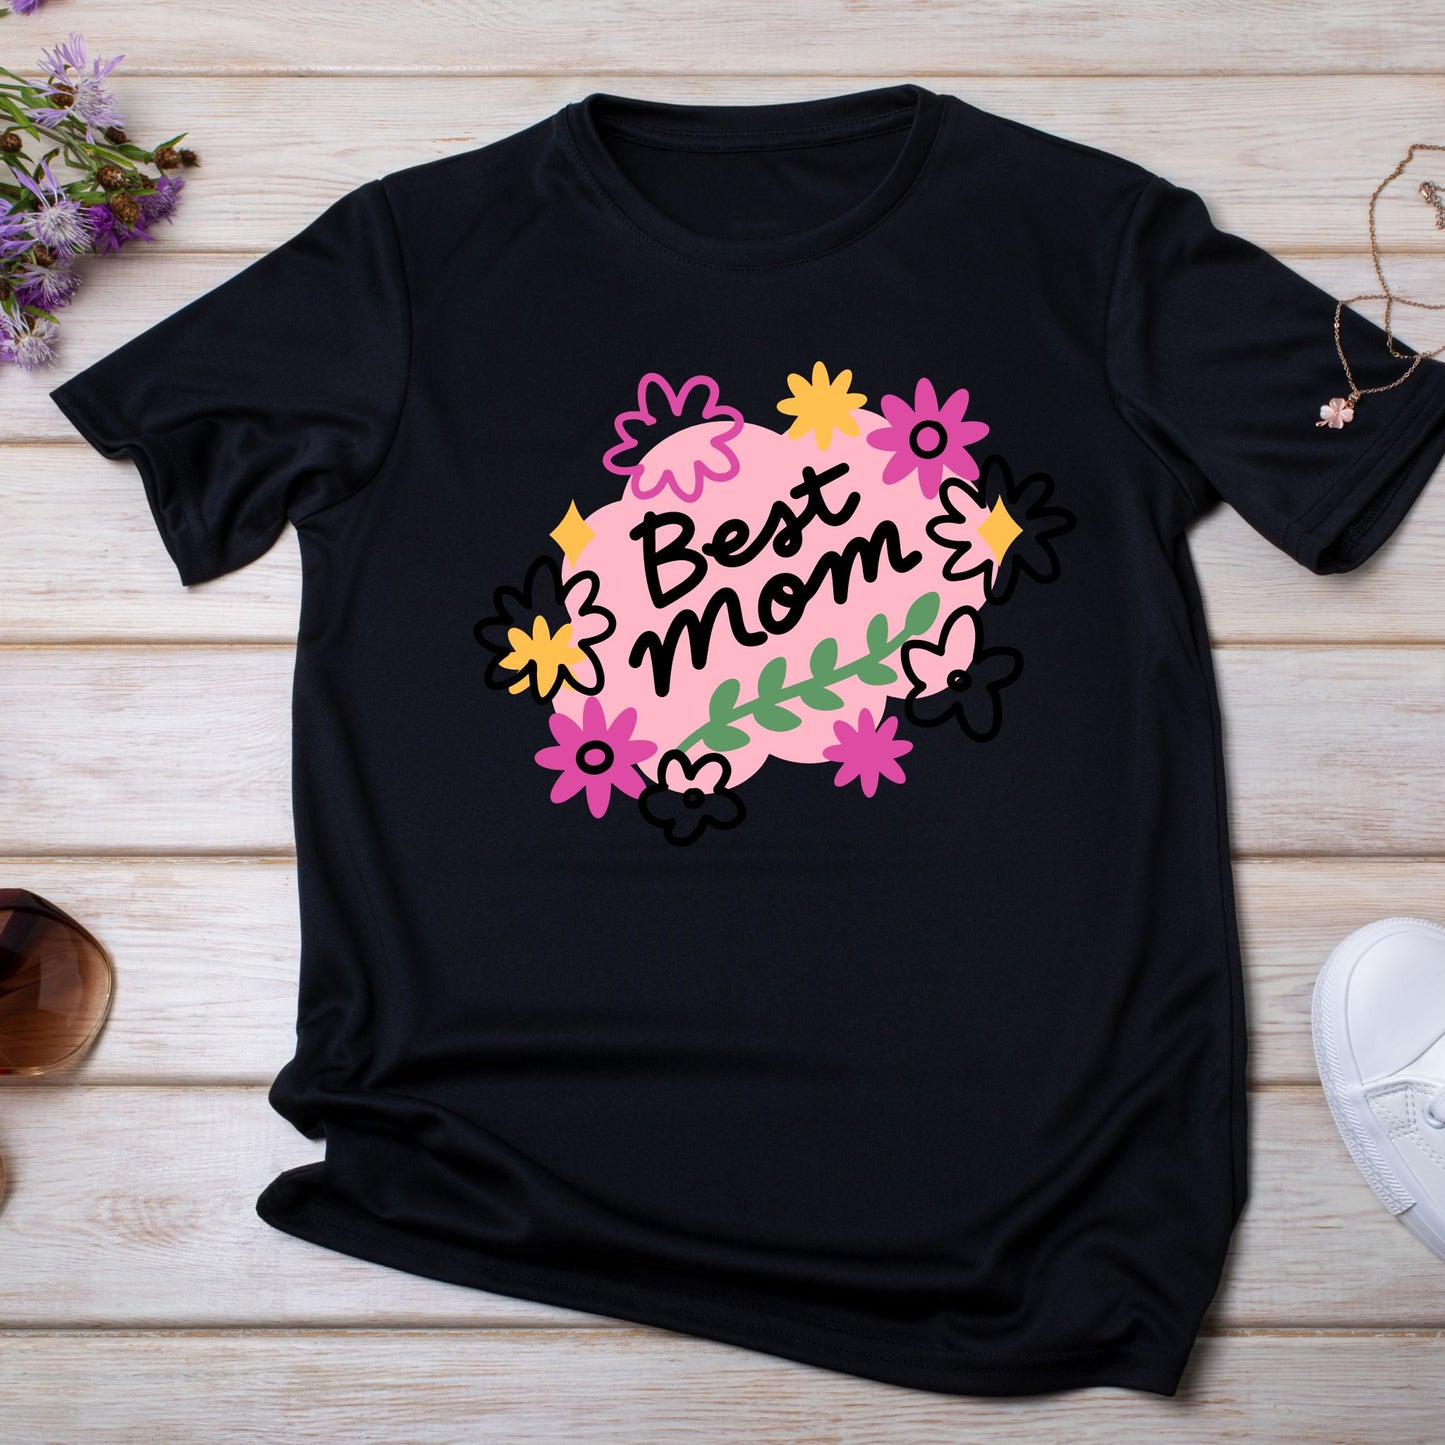 Best Mom in the World - Mama T-Shirt